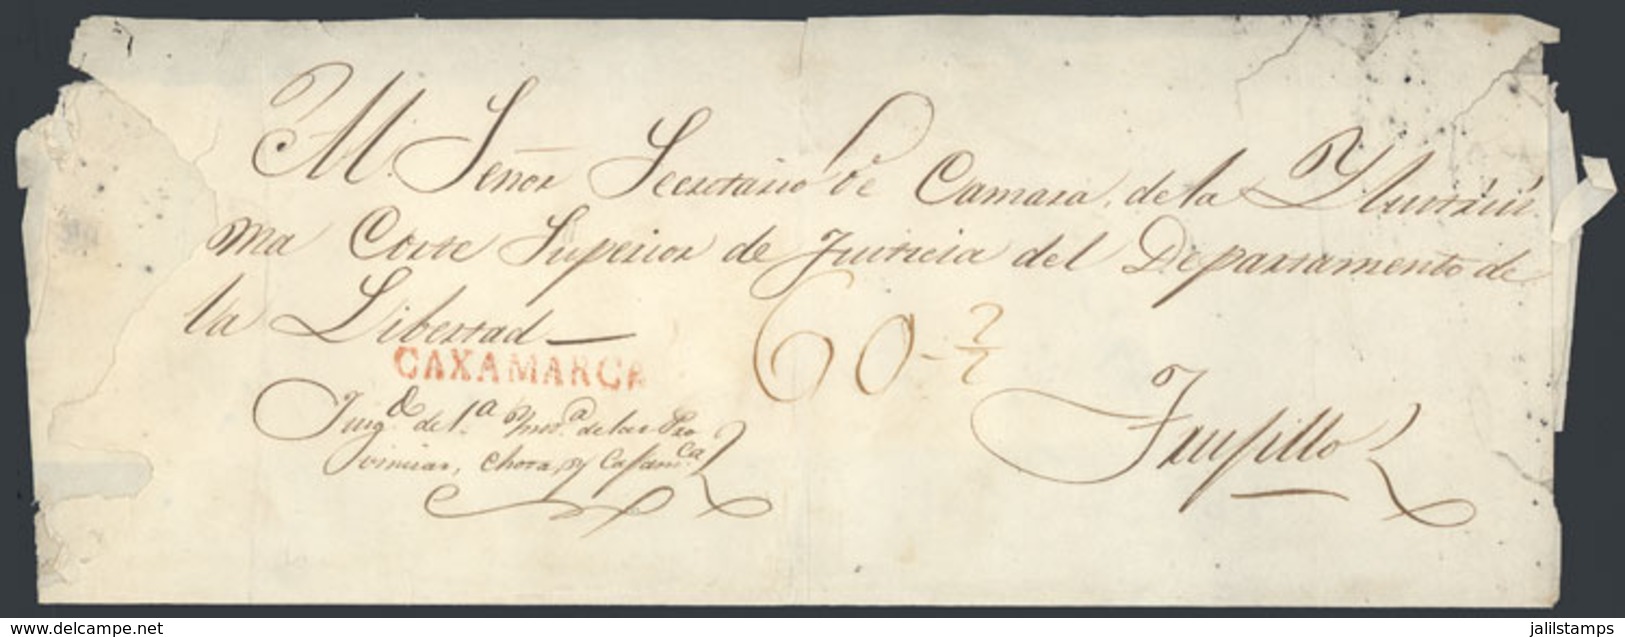 PERU: Official Folded Cover Sent To Trujillo In 1843, With Straightline Red CAXAMARCA Mark Very Well Applied, Minor Defe - Peru